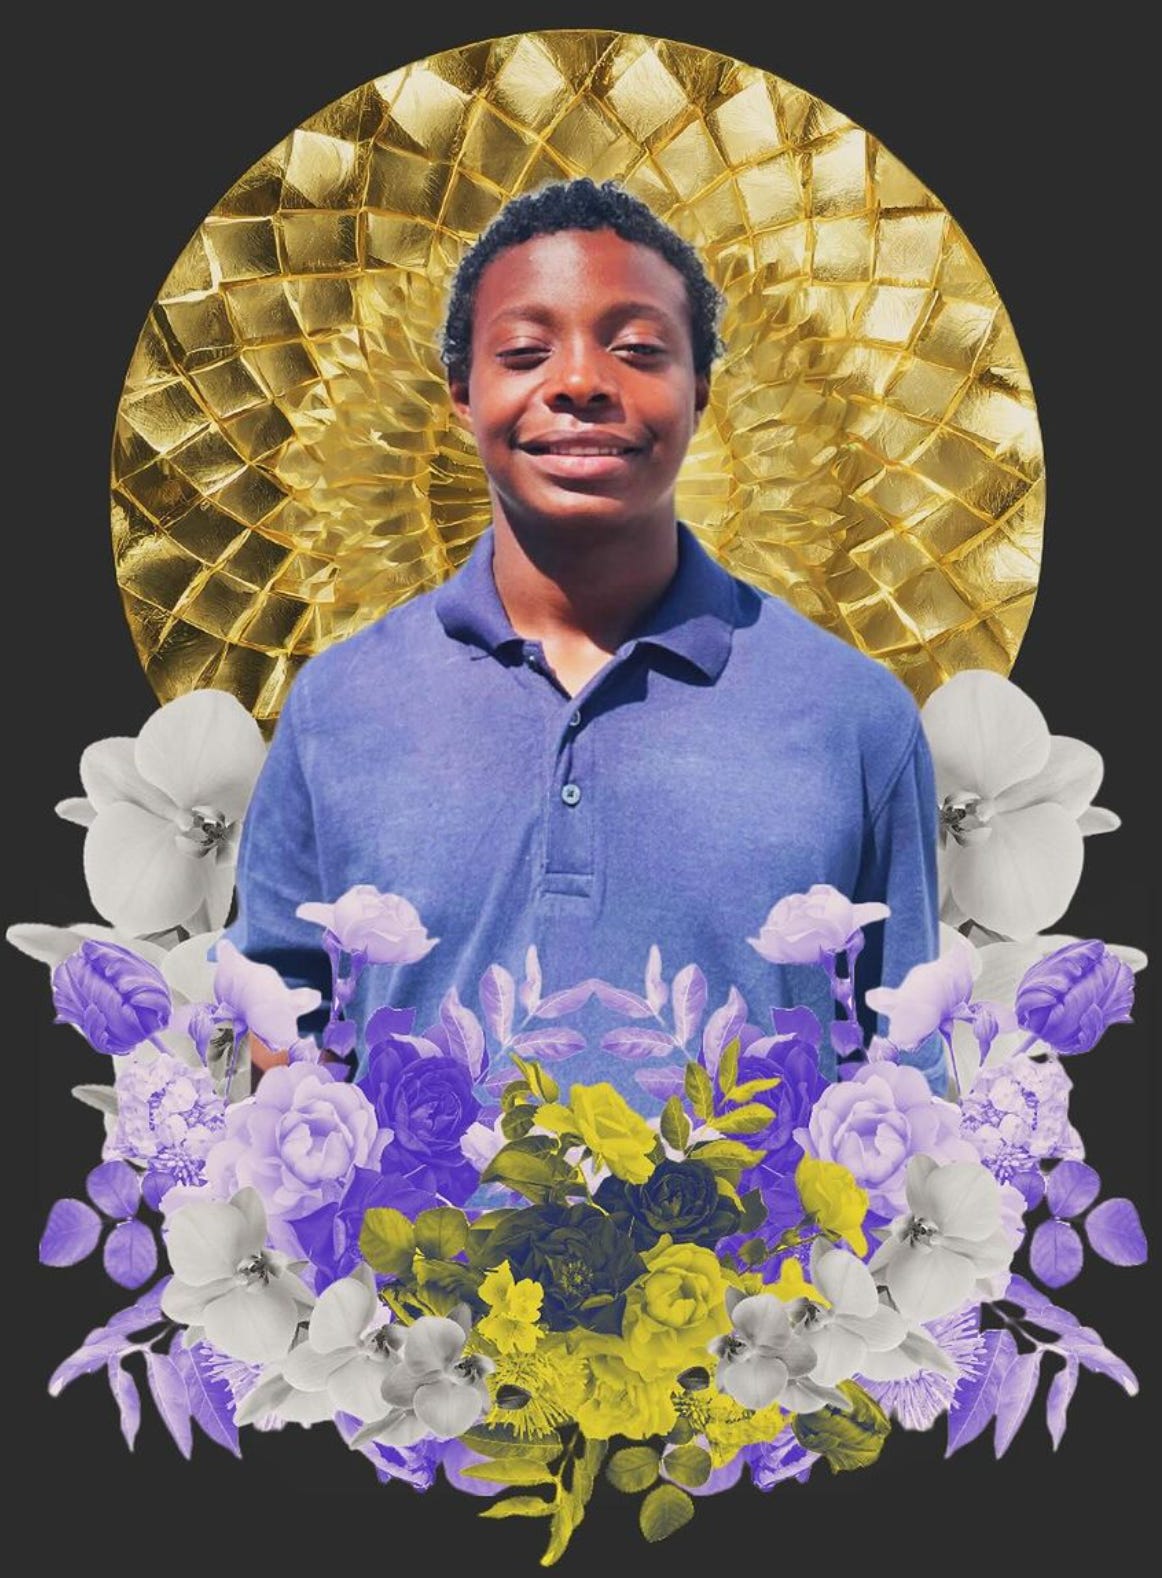 digital collage of a black and autistic 15 year old young male smiling while cascaded in a crown of colorful flowers